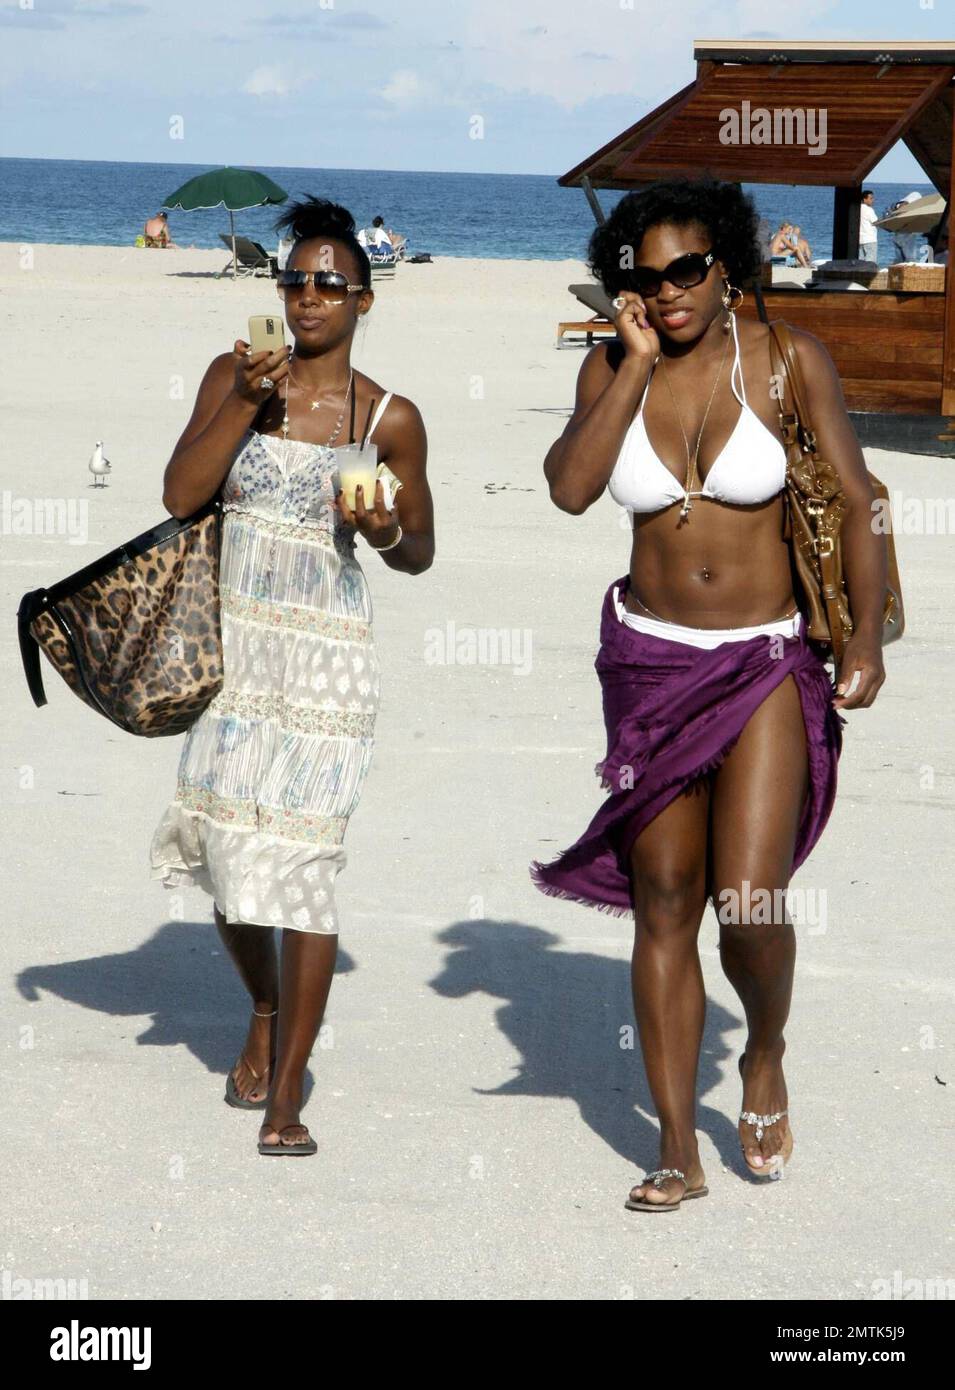 Serena Williams doesn't seem concerned about losing her WTA No. 1 ranking  as she donned a bikini to catch some rays with BFF Kelly Rowland and some  other friends on South Beach.